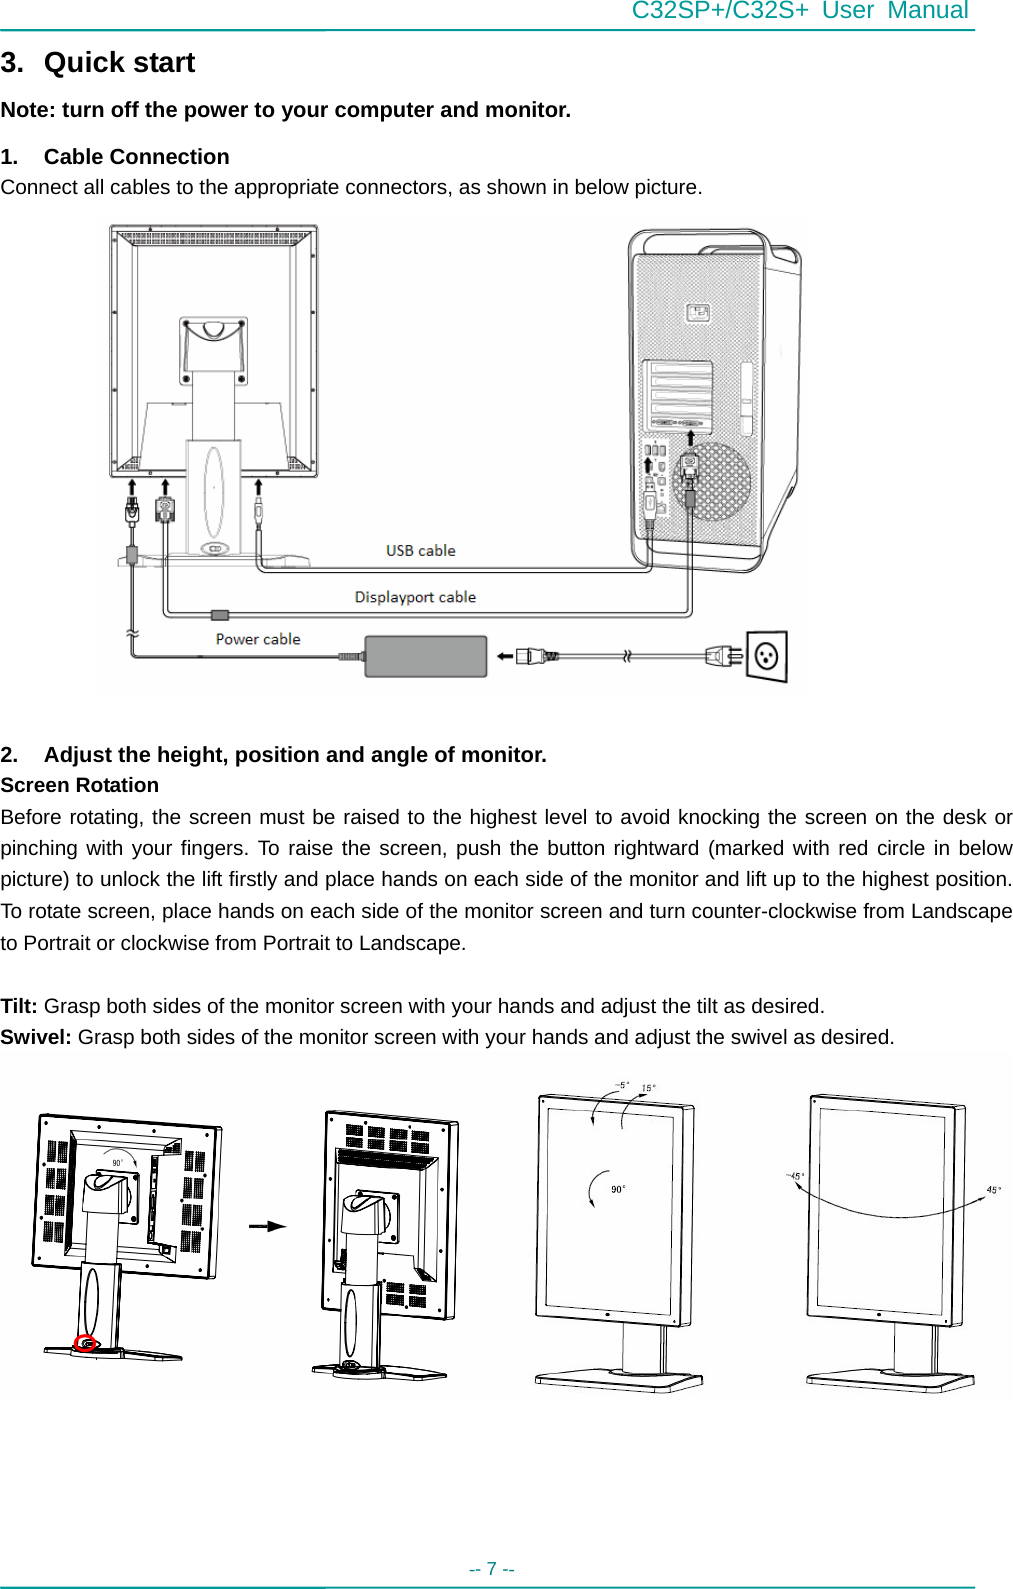 C32SP+/C32S+ User Manual -- 7 --   3. Quick start Note: turn off the power to your computer and monitor. 1. Cable Connection Connect all cables to the appropriate connectors, as shown in below picture.                  2.  Adjust the height, position and angle of monitor. Screen Rotation   Before rotating, the screen must be raised to the highest level to avoid knocking the screen on the desk or pinching with your fingers. To raise the screen, push the button rightward (marked with red circle in below picture) to unlock the lift firstly and place hands on each side of the monitor and lift up to the highest position. To rotate screen, place hands on each side of the monitor screen and turn counter-clockwise from Landscape to Portrait or clockwise from Portrait to Landscape.  Tilt: Grasp both sides of the monitor screen with your hands and adjust the tilt as desired. Swivel: Grasp both sides of the monitor screen with your hands and adjust the swivel as desired.                 